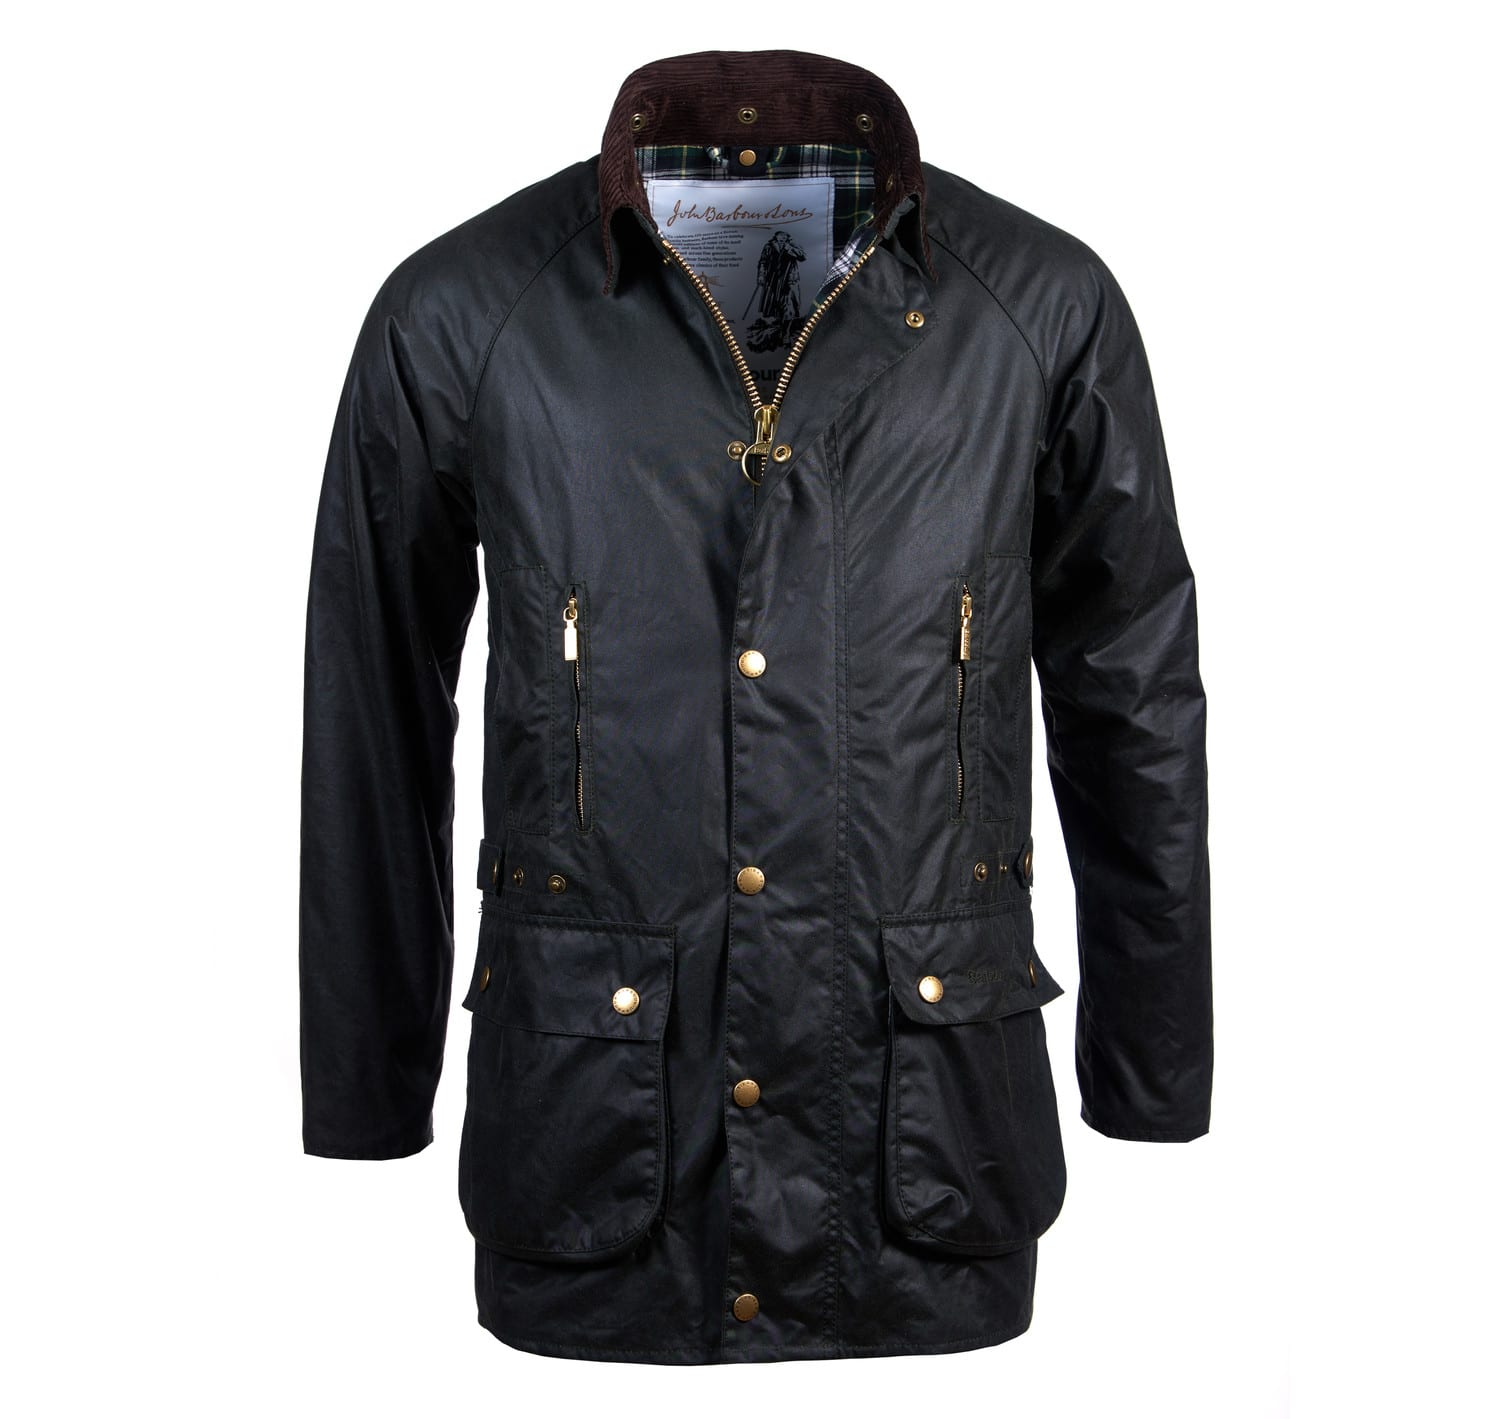 barbour jacket lining